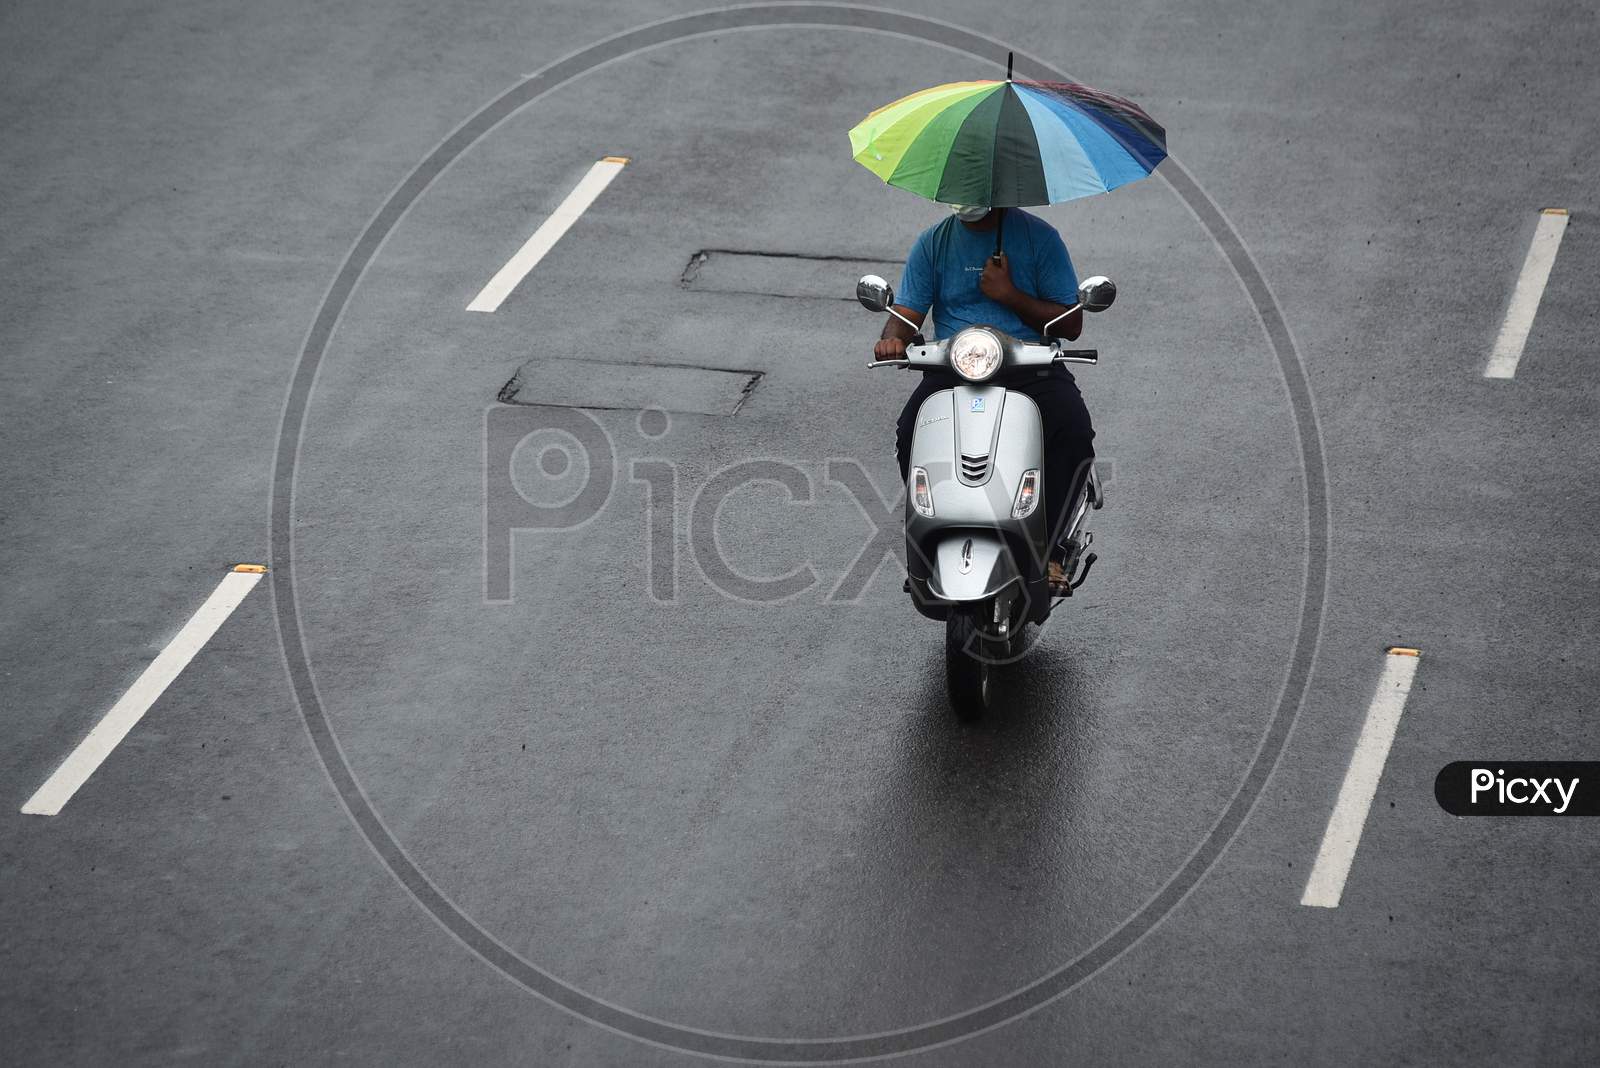 A man holds an umbrella while driving a two-wheeler on a road during rain in Vijayawada.